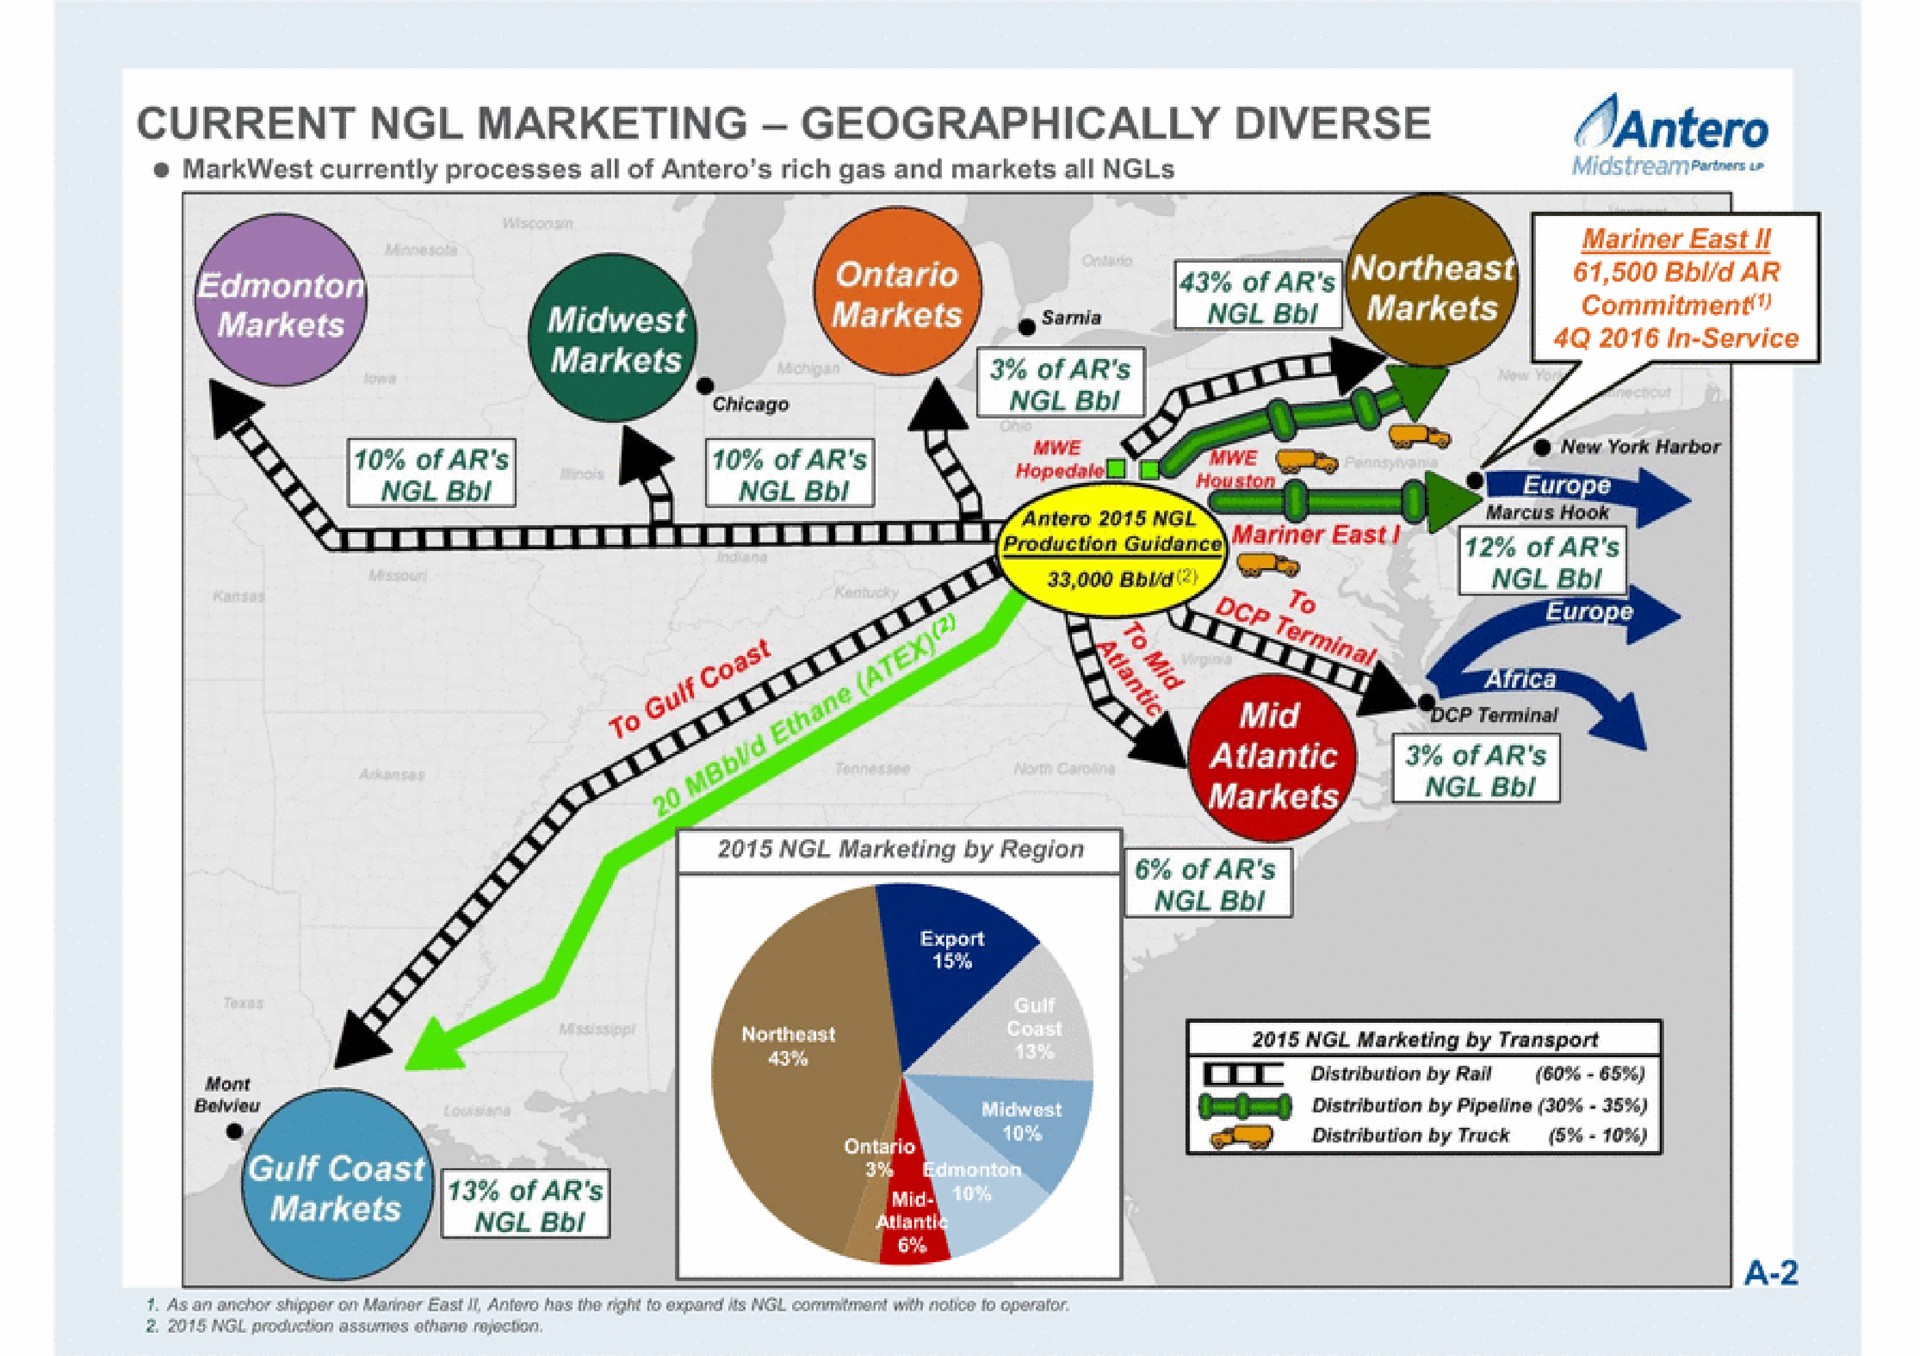 current marketing geographically diverse of ares alt | Antero Midstream Partners